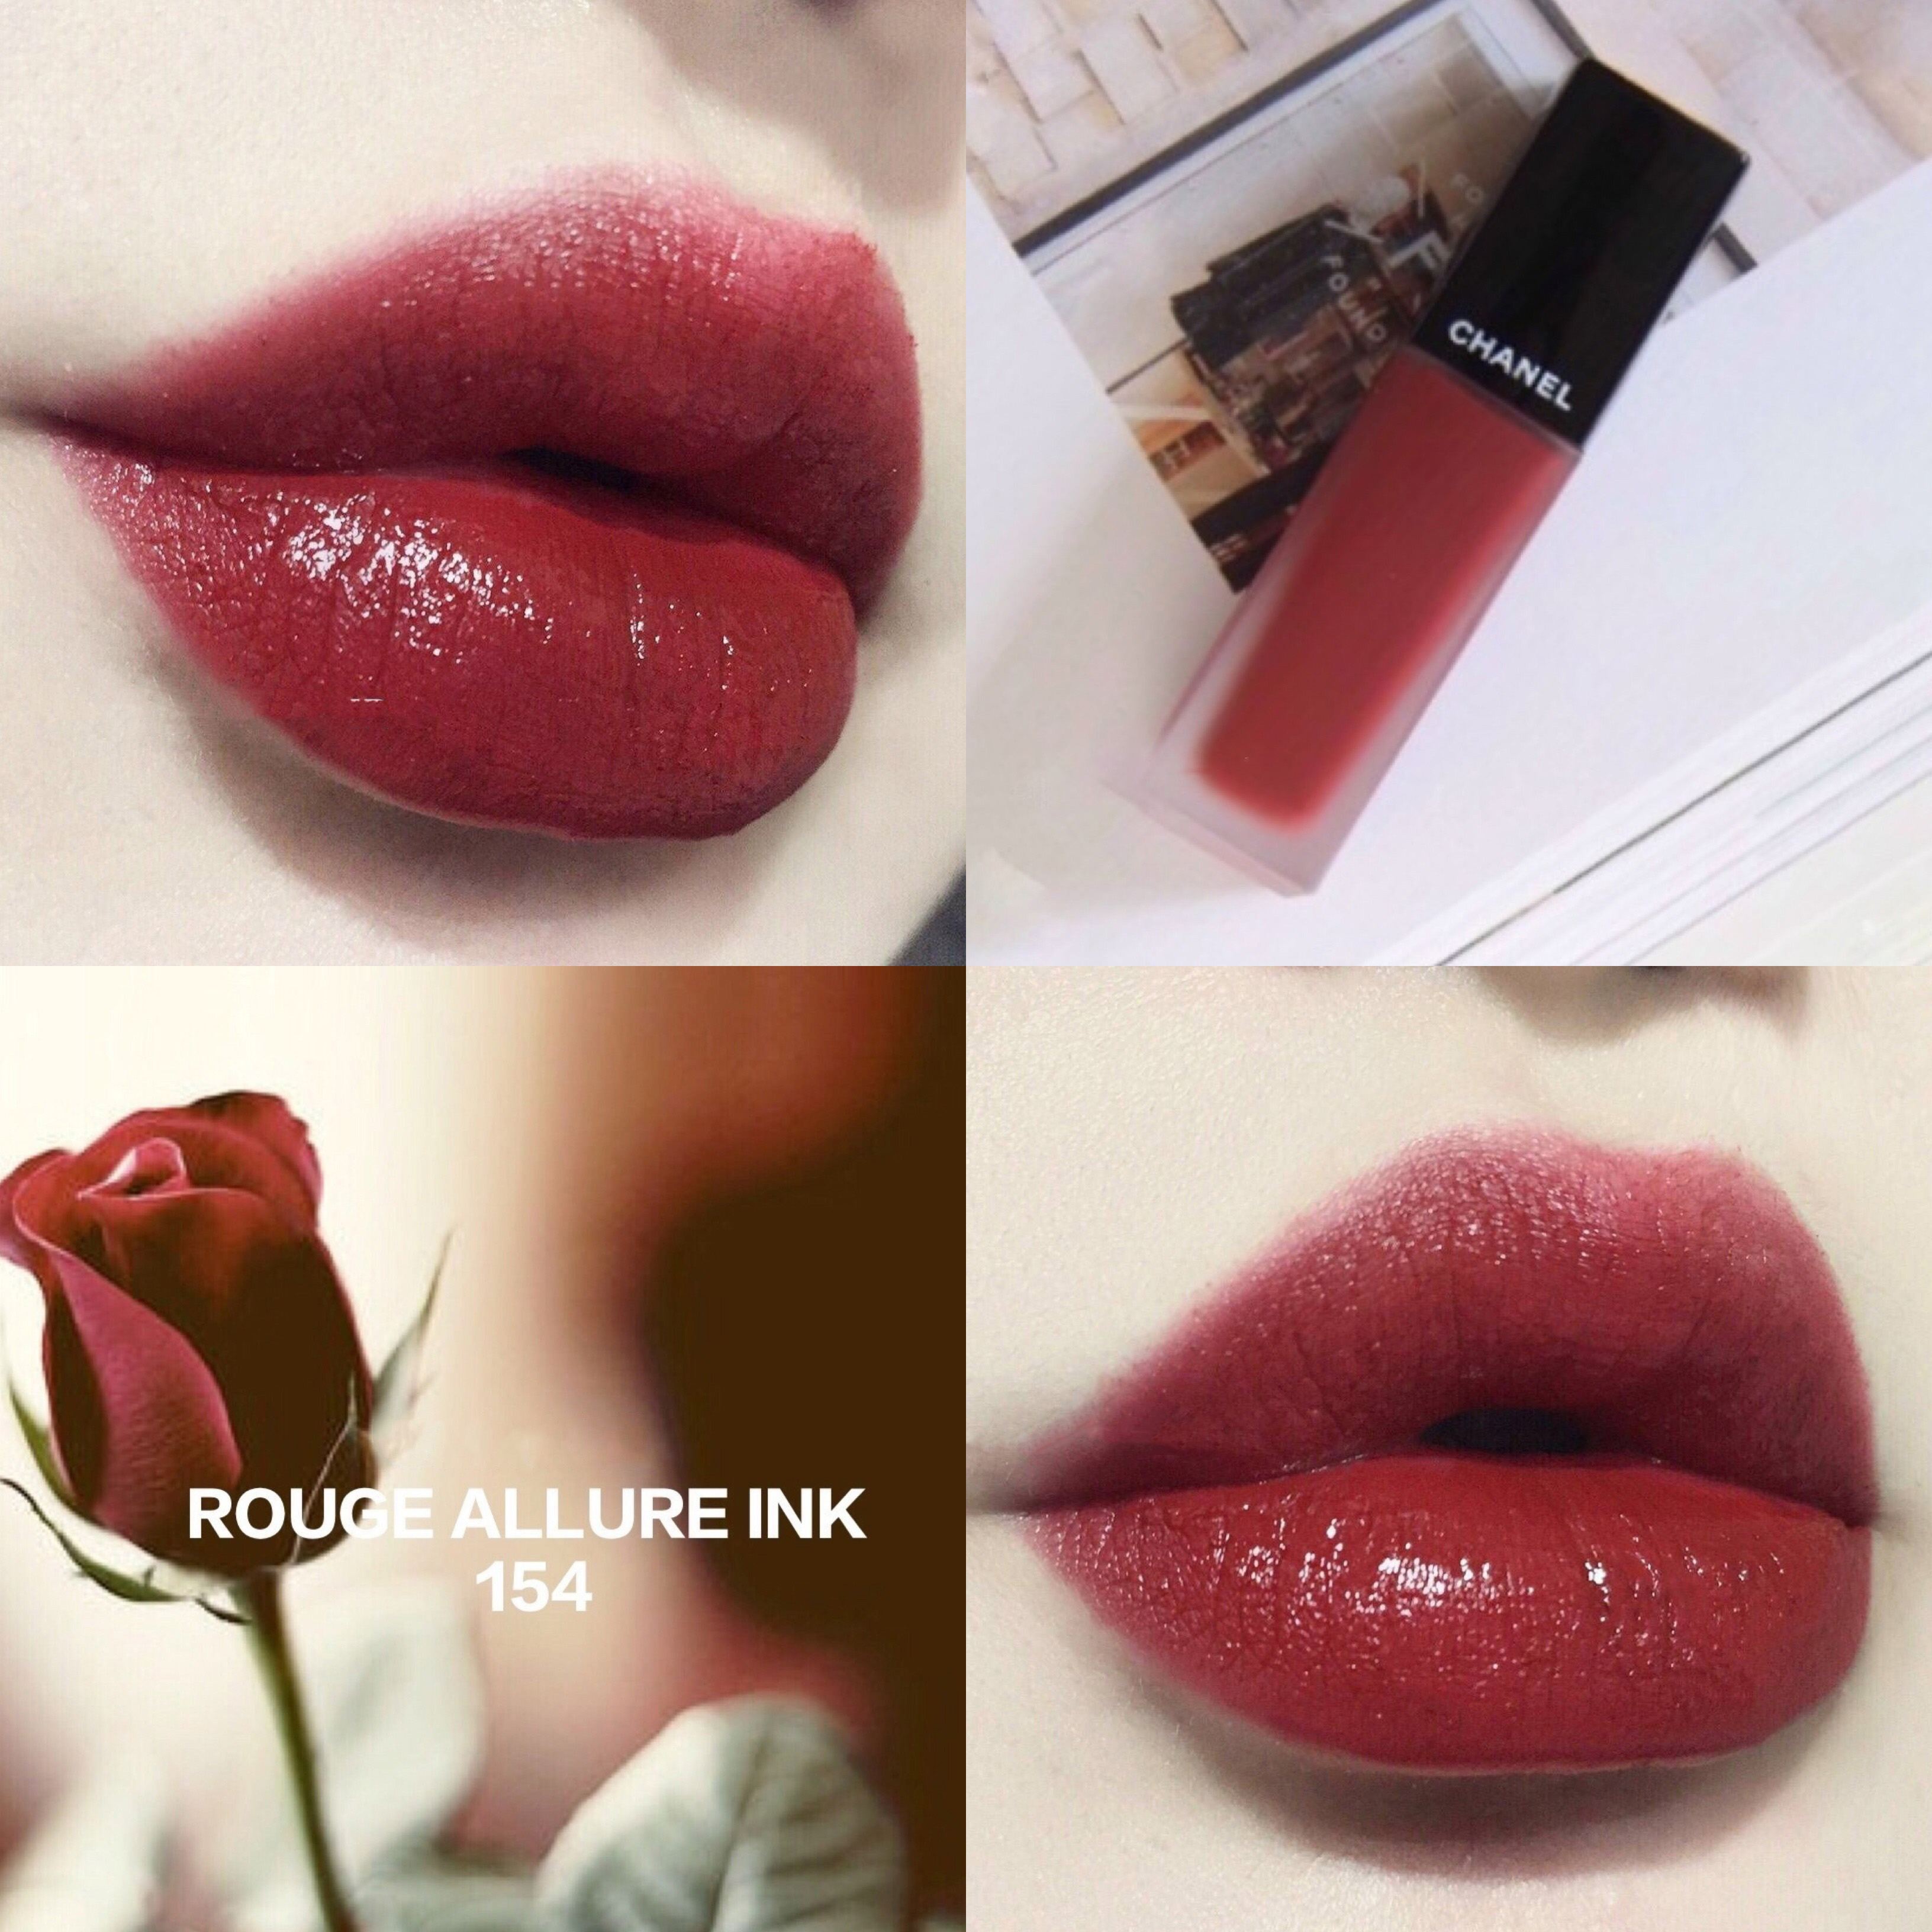 Reviewed: chanel's rouge allure is a standout red lipstick